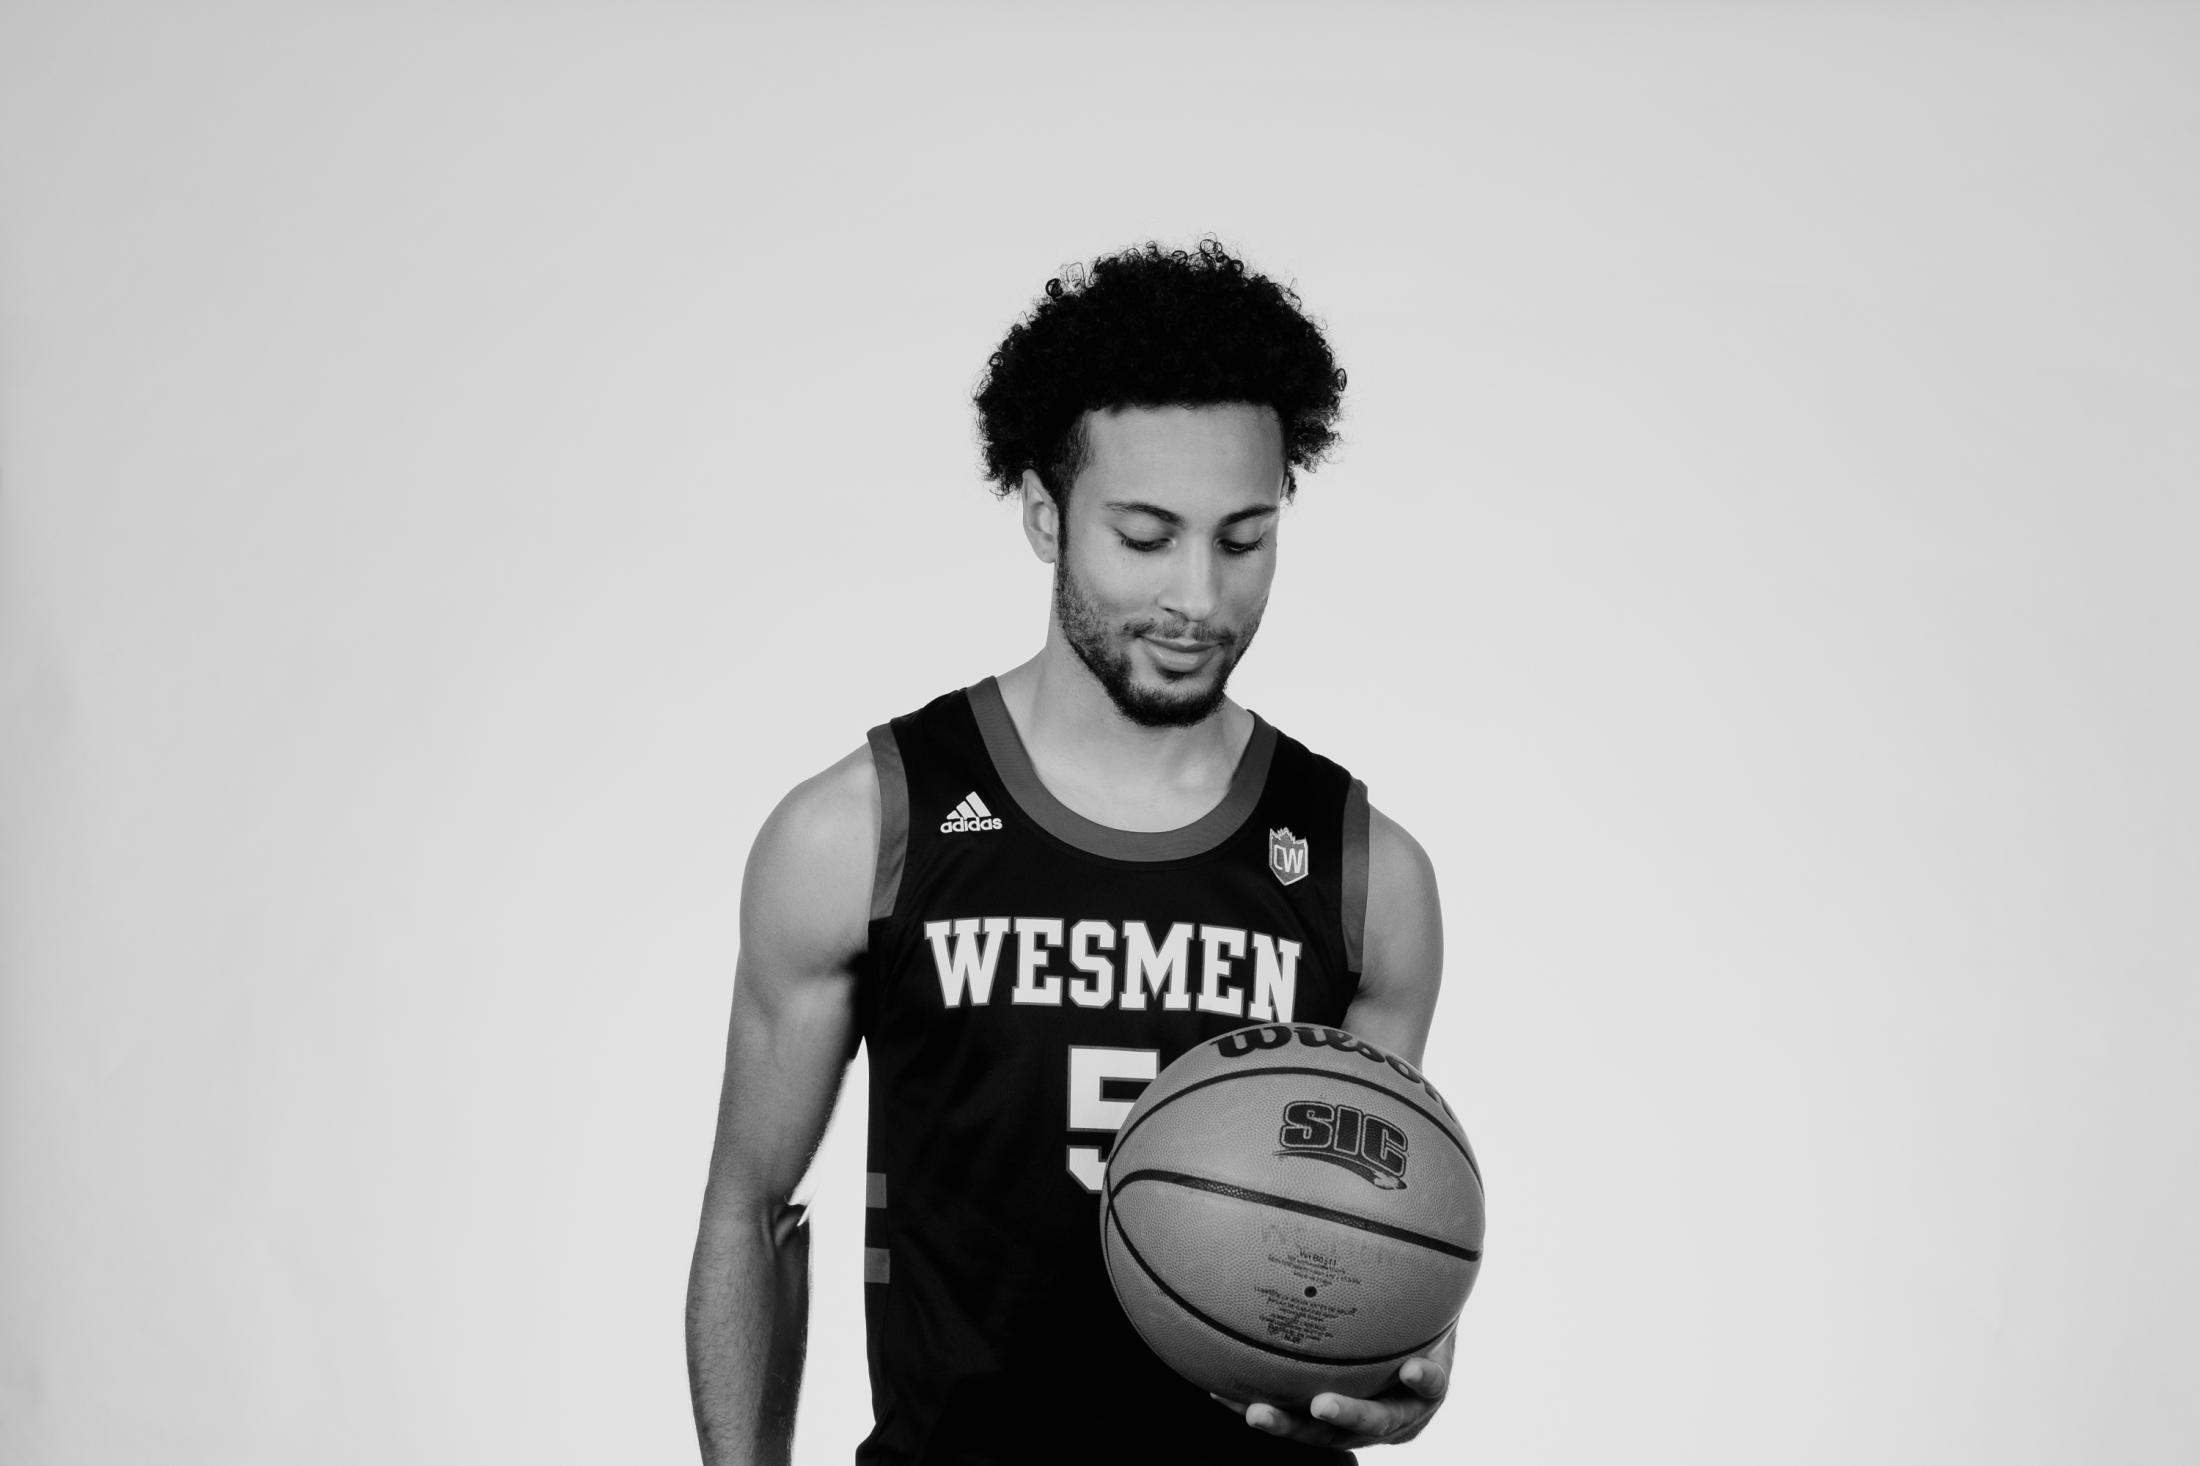 Daniel Crump / Wesmen Athletics. Headshots and candids. Sports are back baby! September 7, 2021.